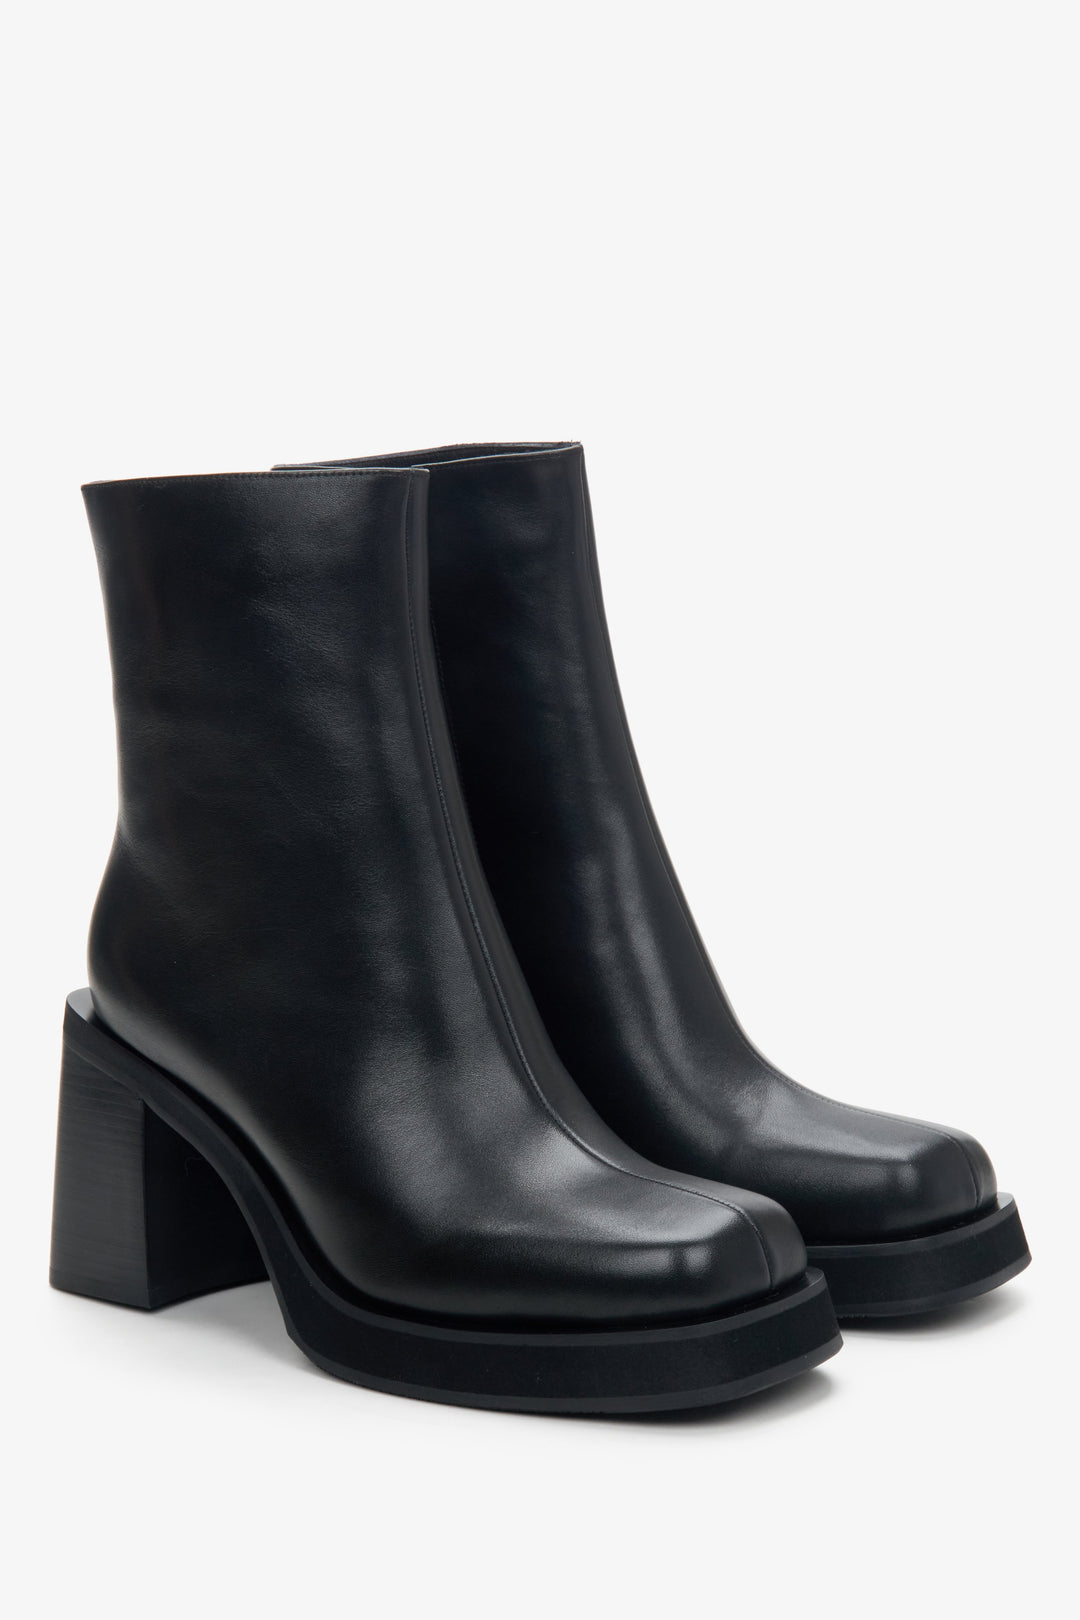 Black platform boots made of genuine leather by Estro.